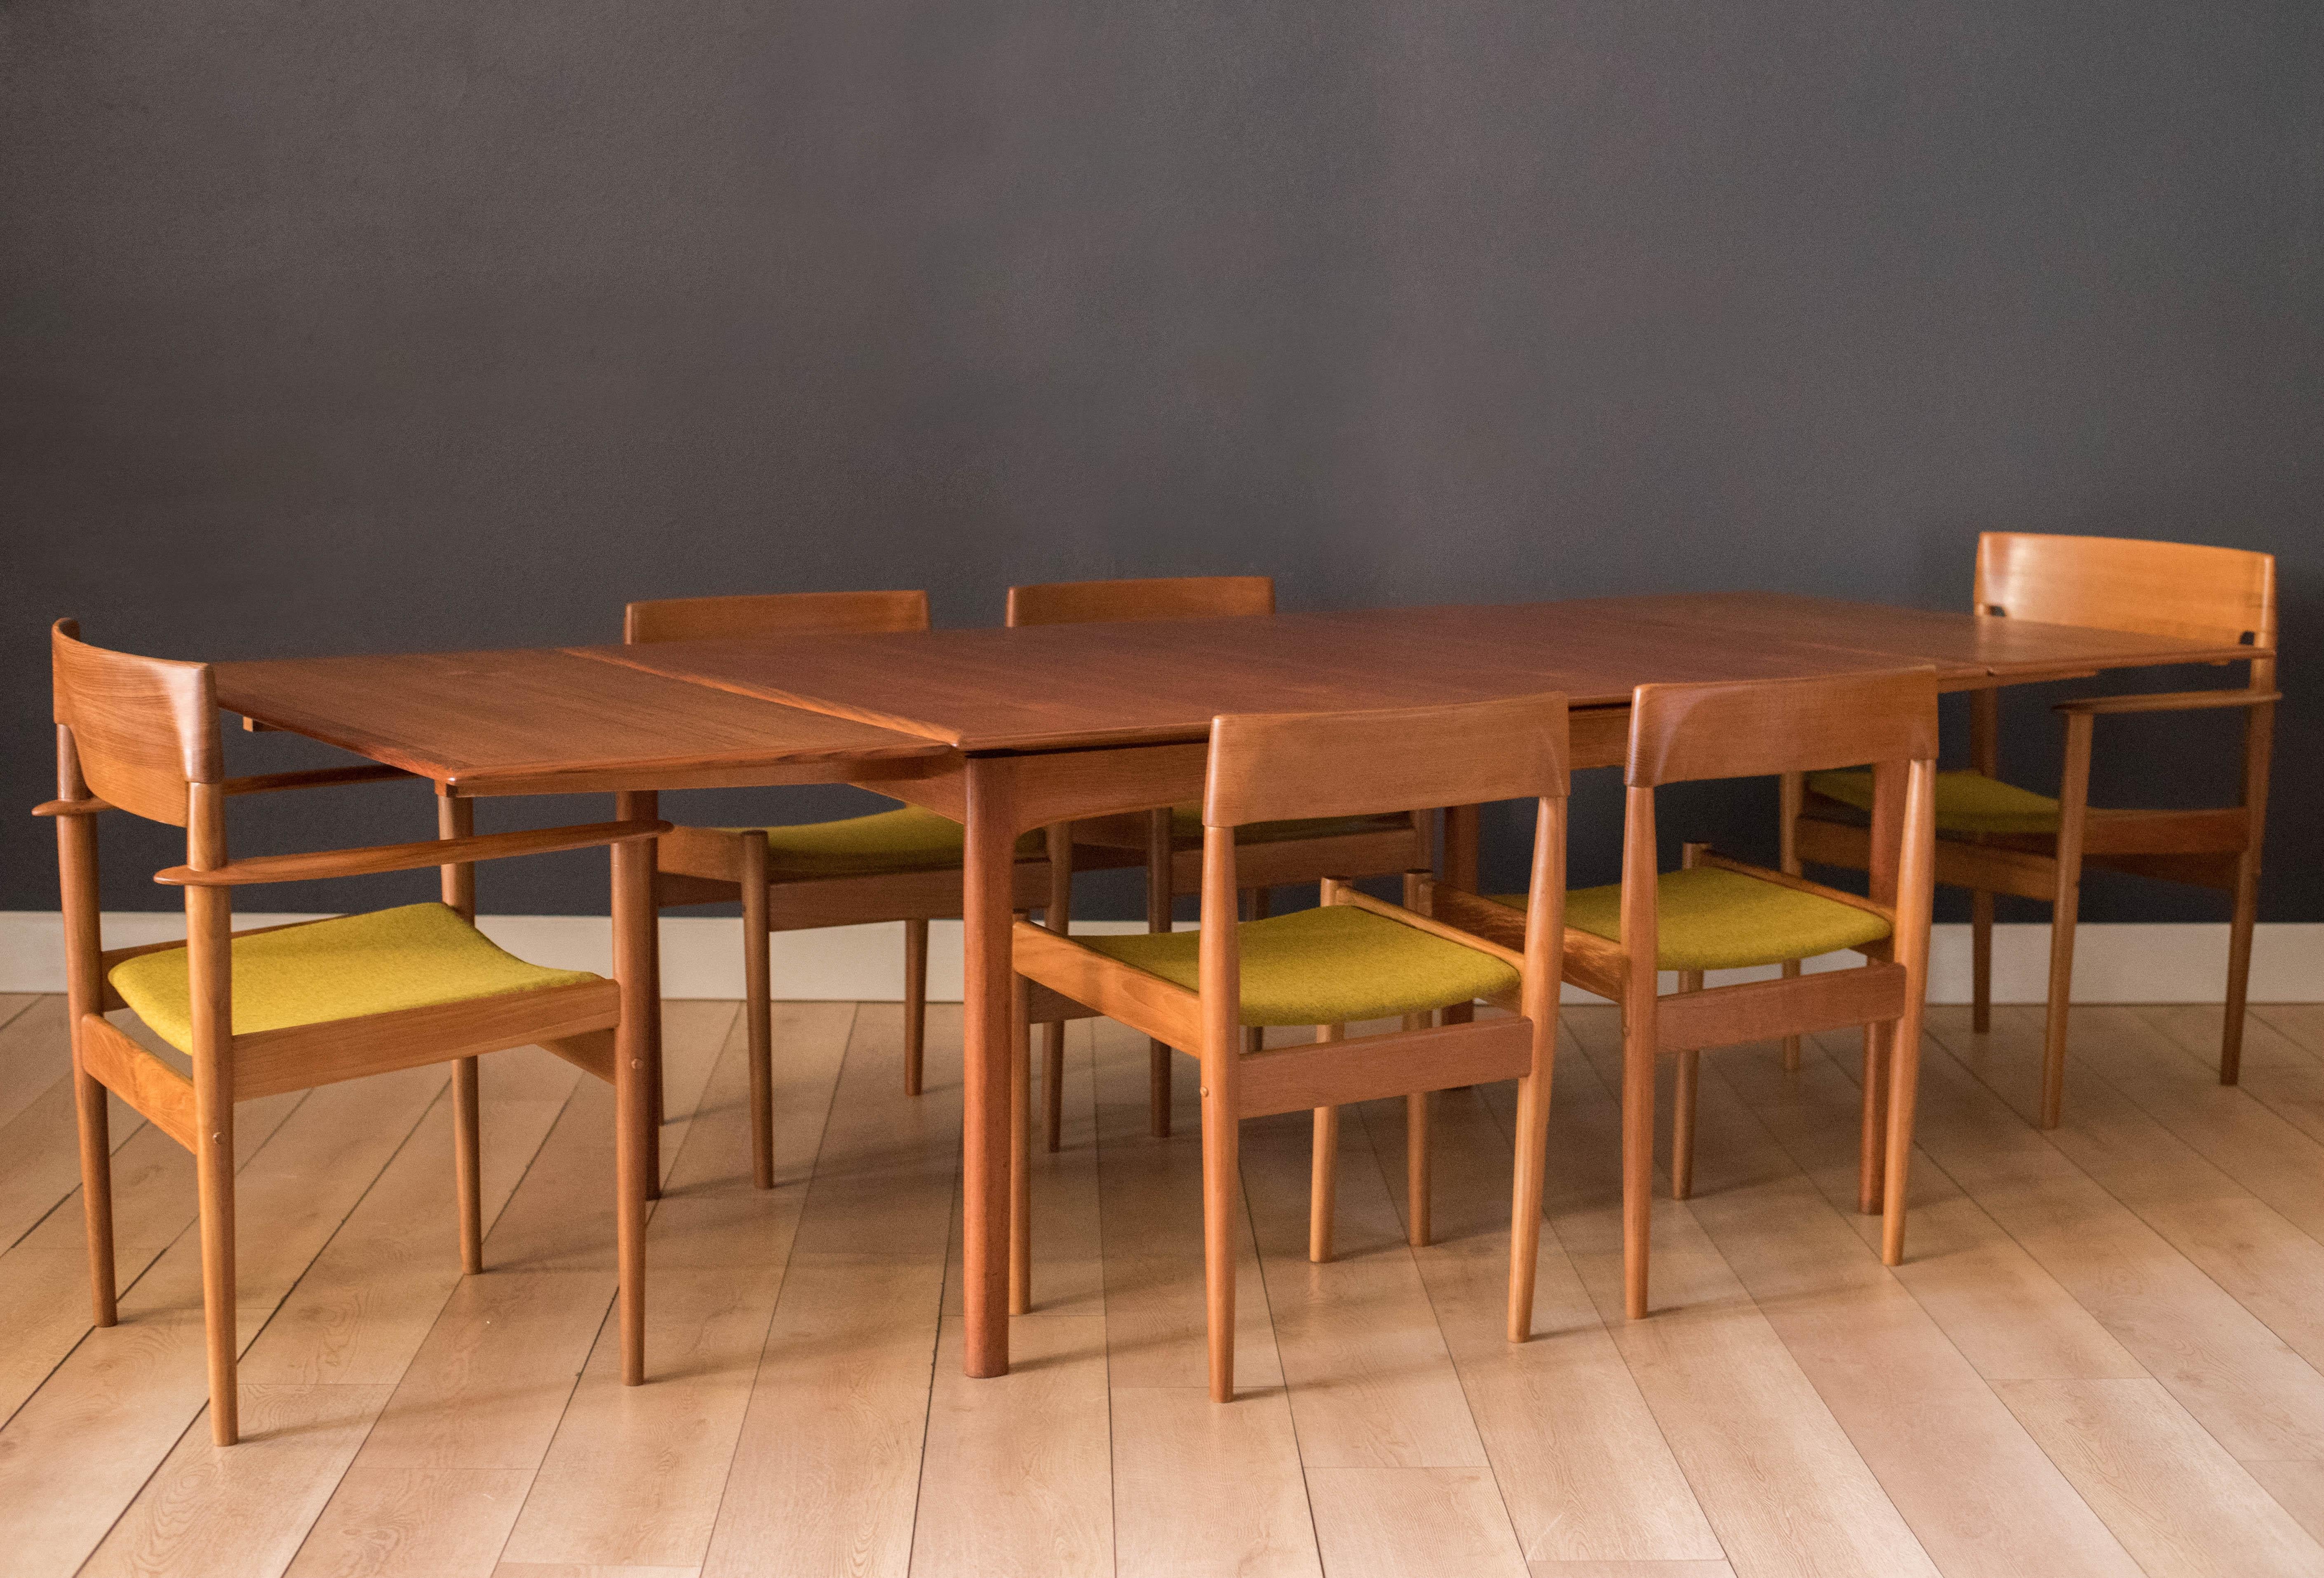 Mid-Century Modern dining chairs designed by Grete Jalk for P. Jeppesen, Denmark. This set of six features sculpted teak frames and has been newly reupholstered in a chartreuse yellow textile by Maharam. Includes four side chairs and two captain